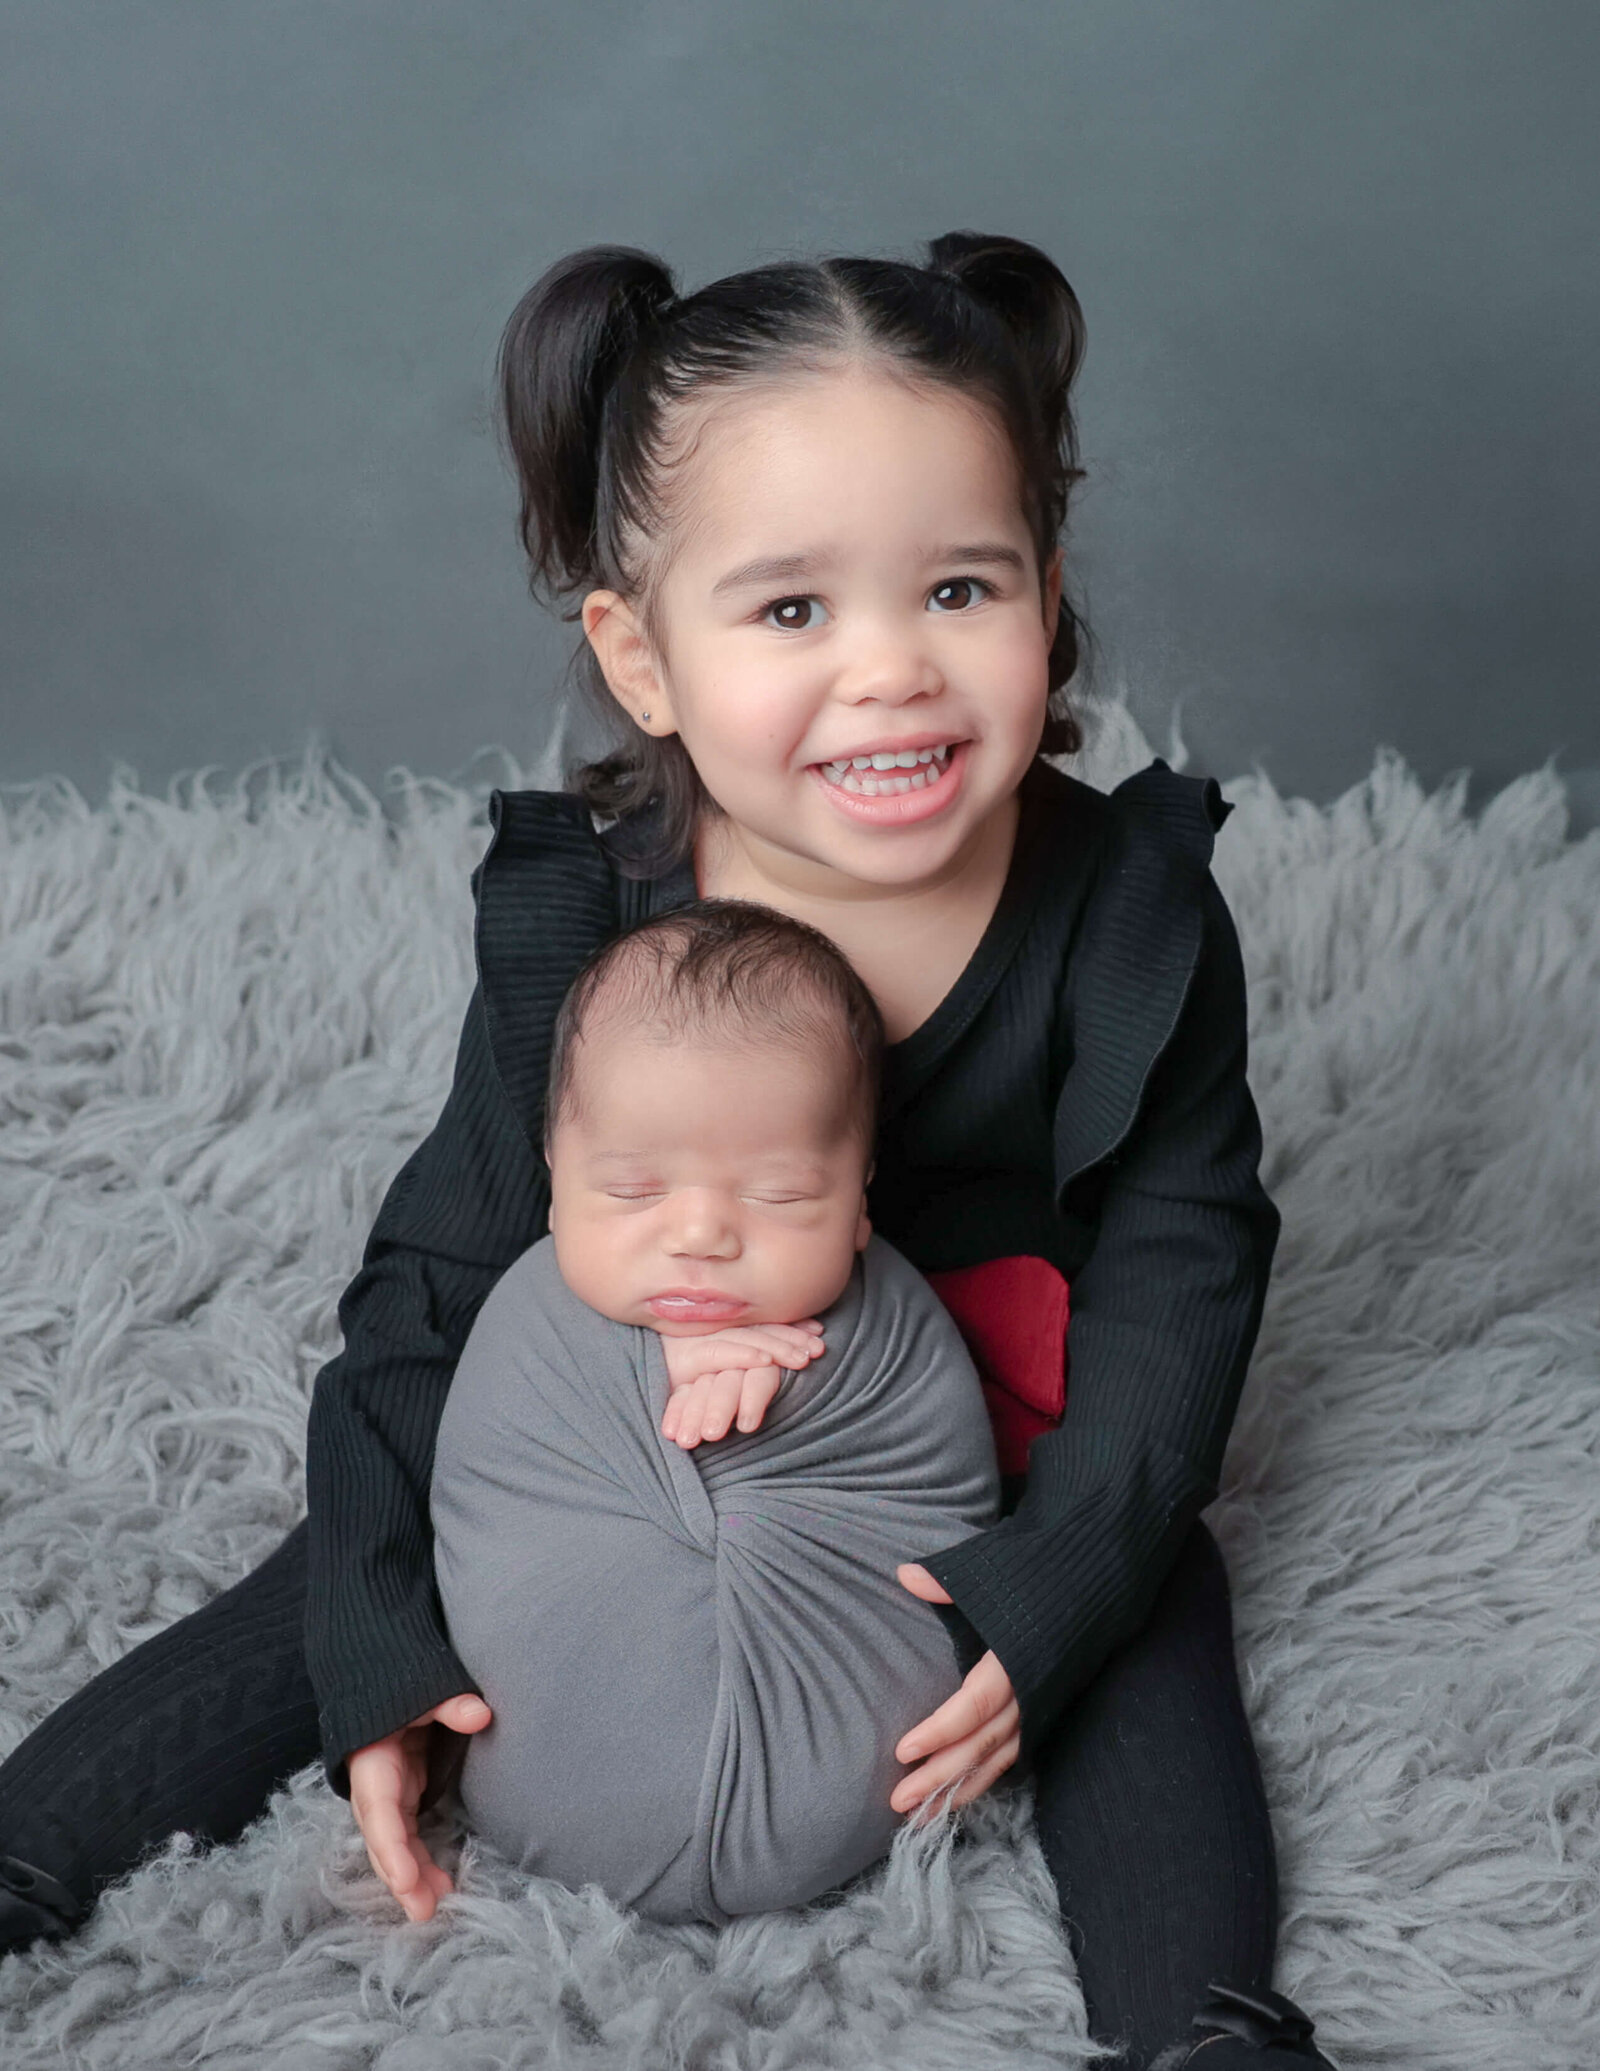 Siblings posed at our studio located in Rochester, NY.